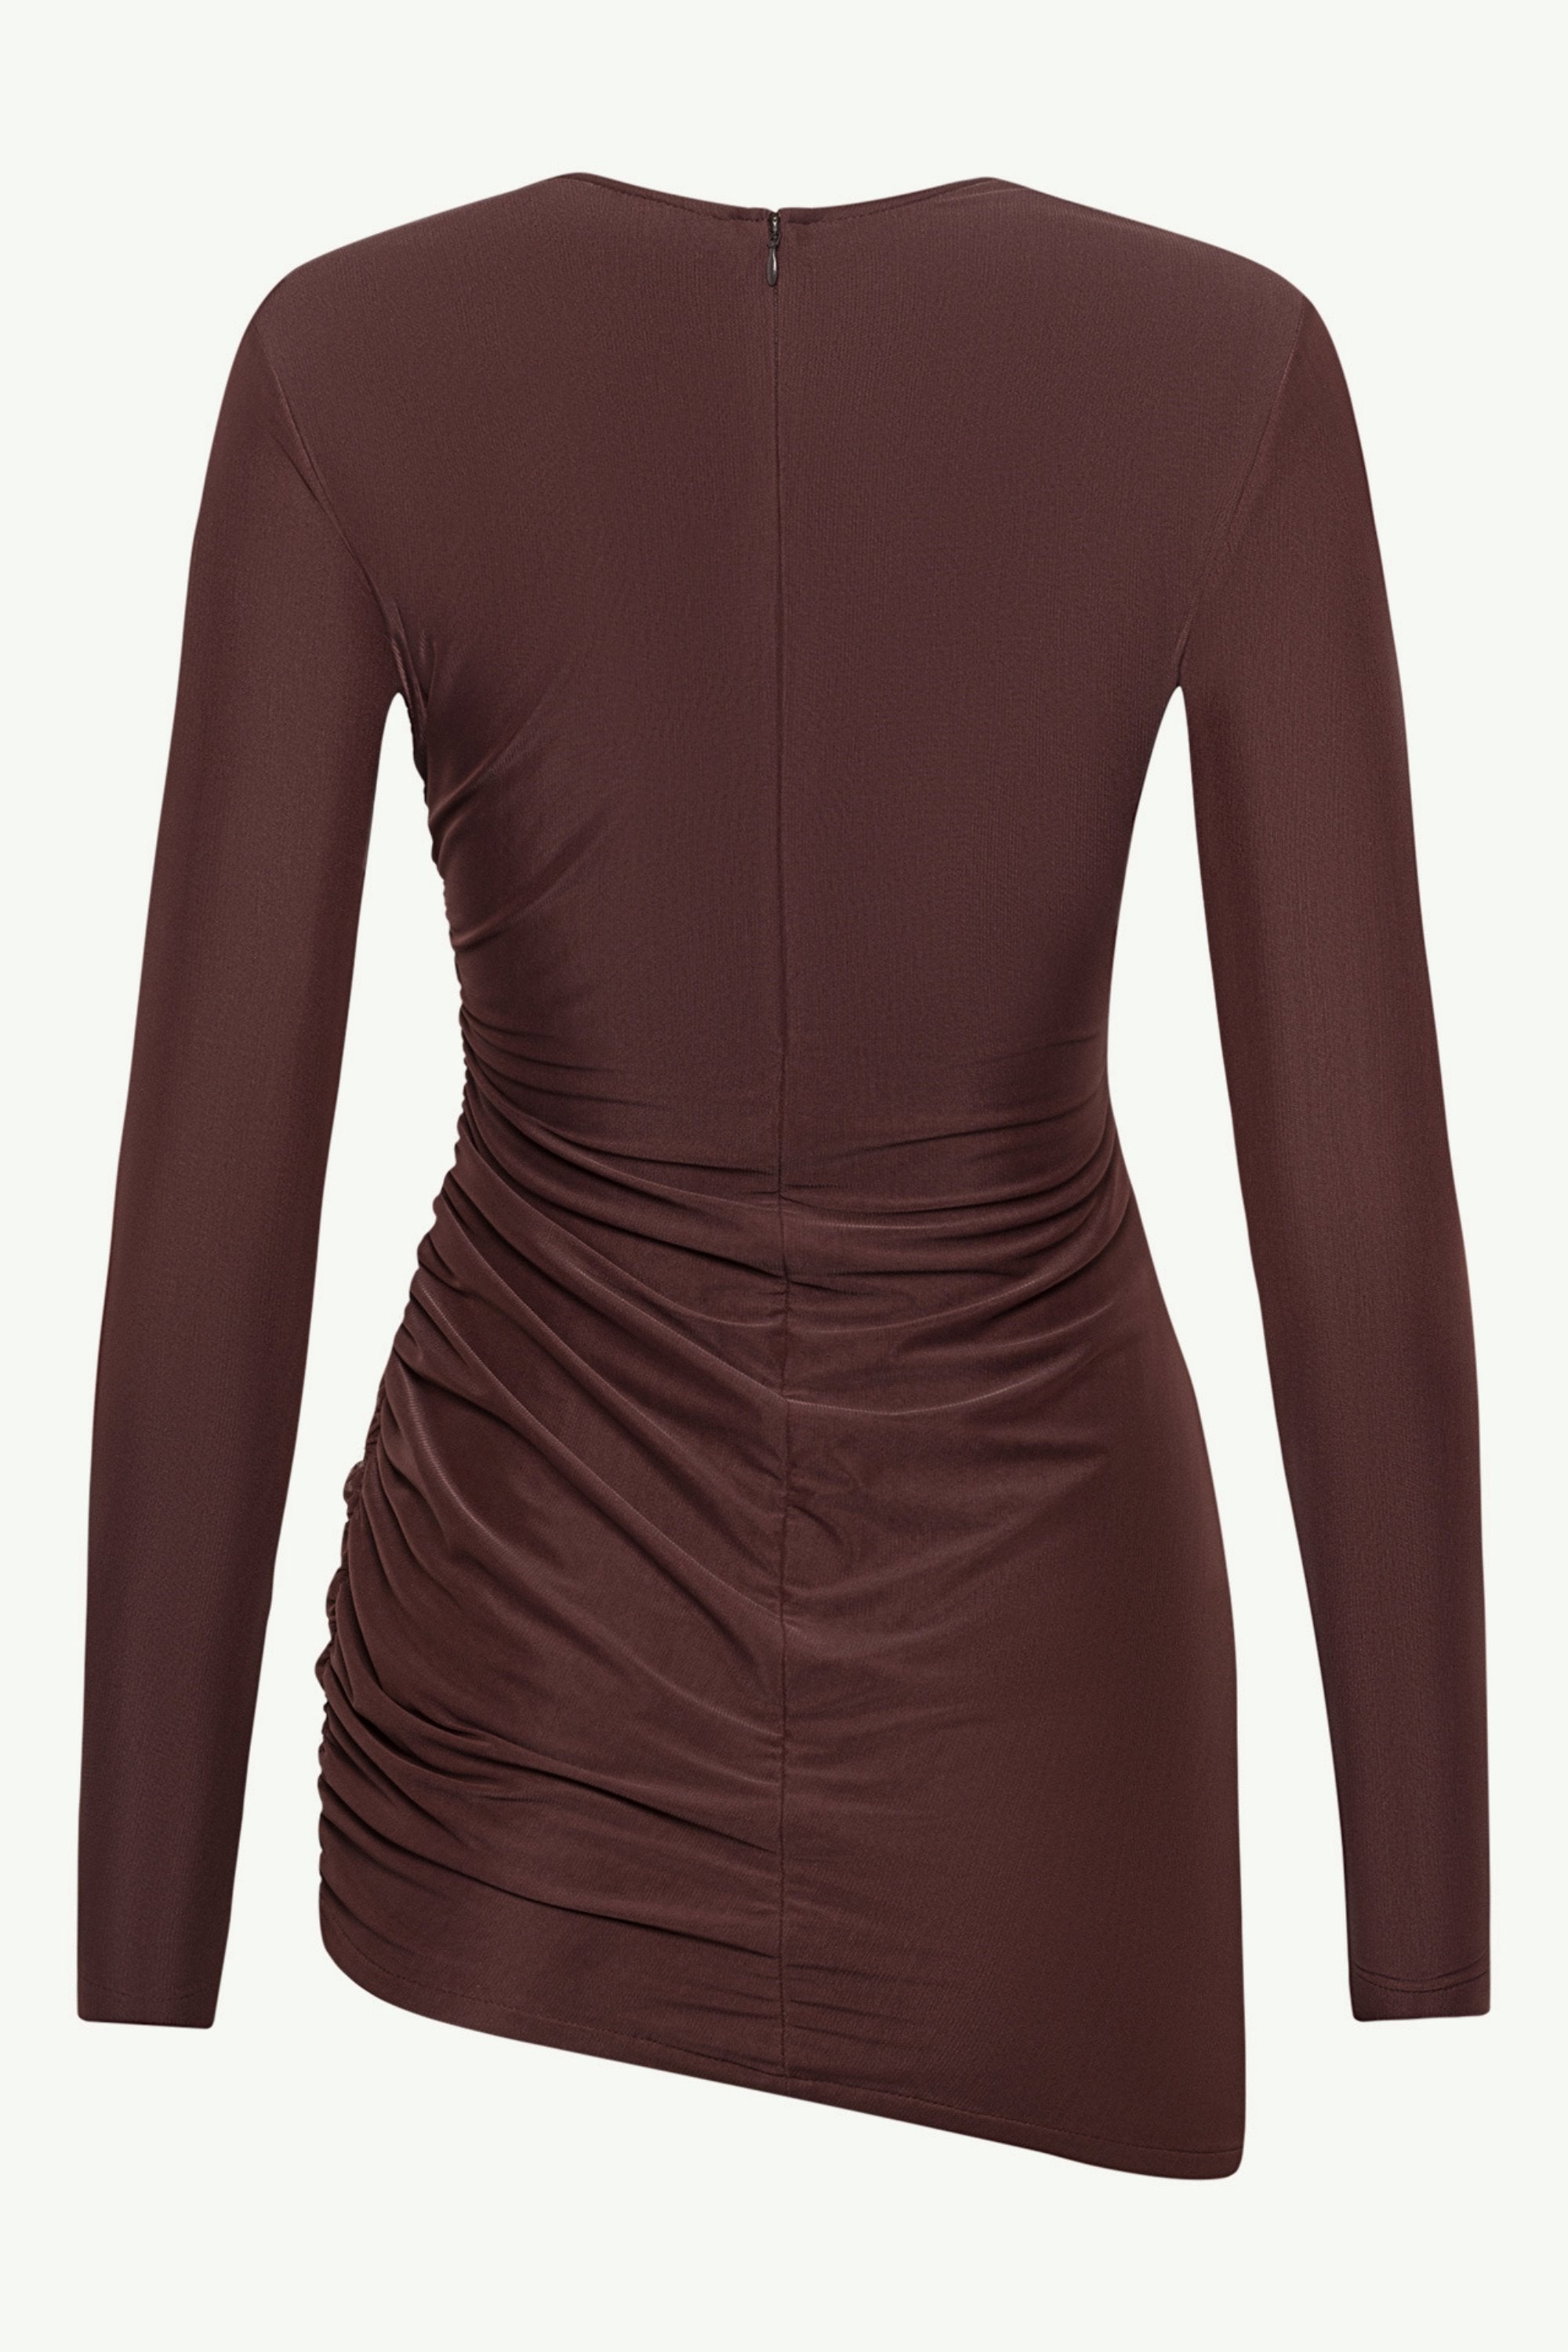 Mesh Rouched Top - Chocolate Plum Clothing Veiled 